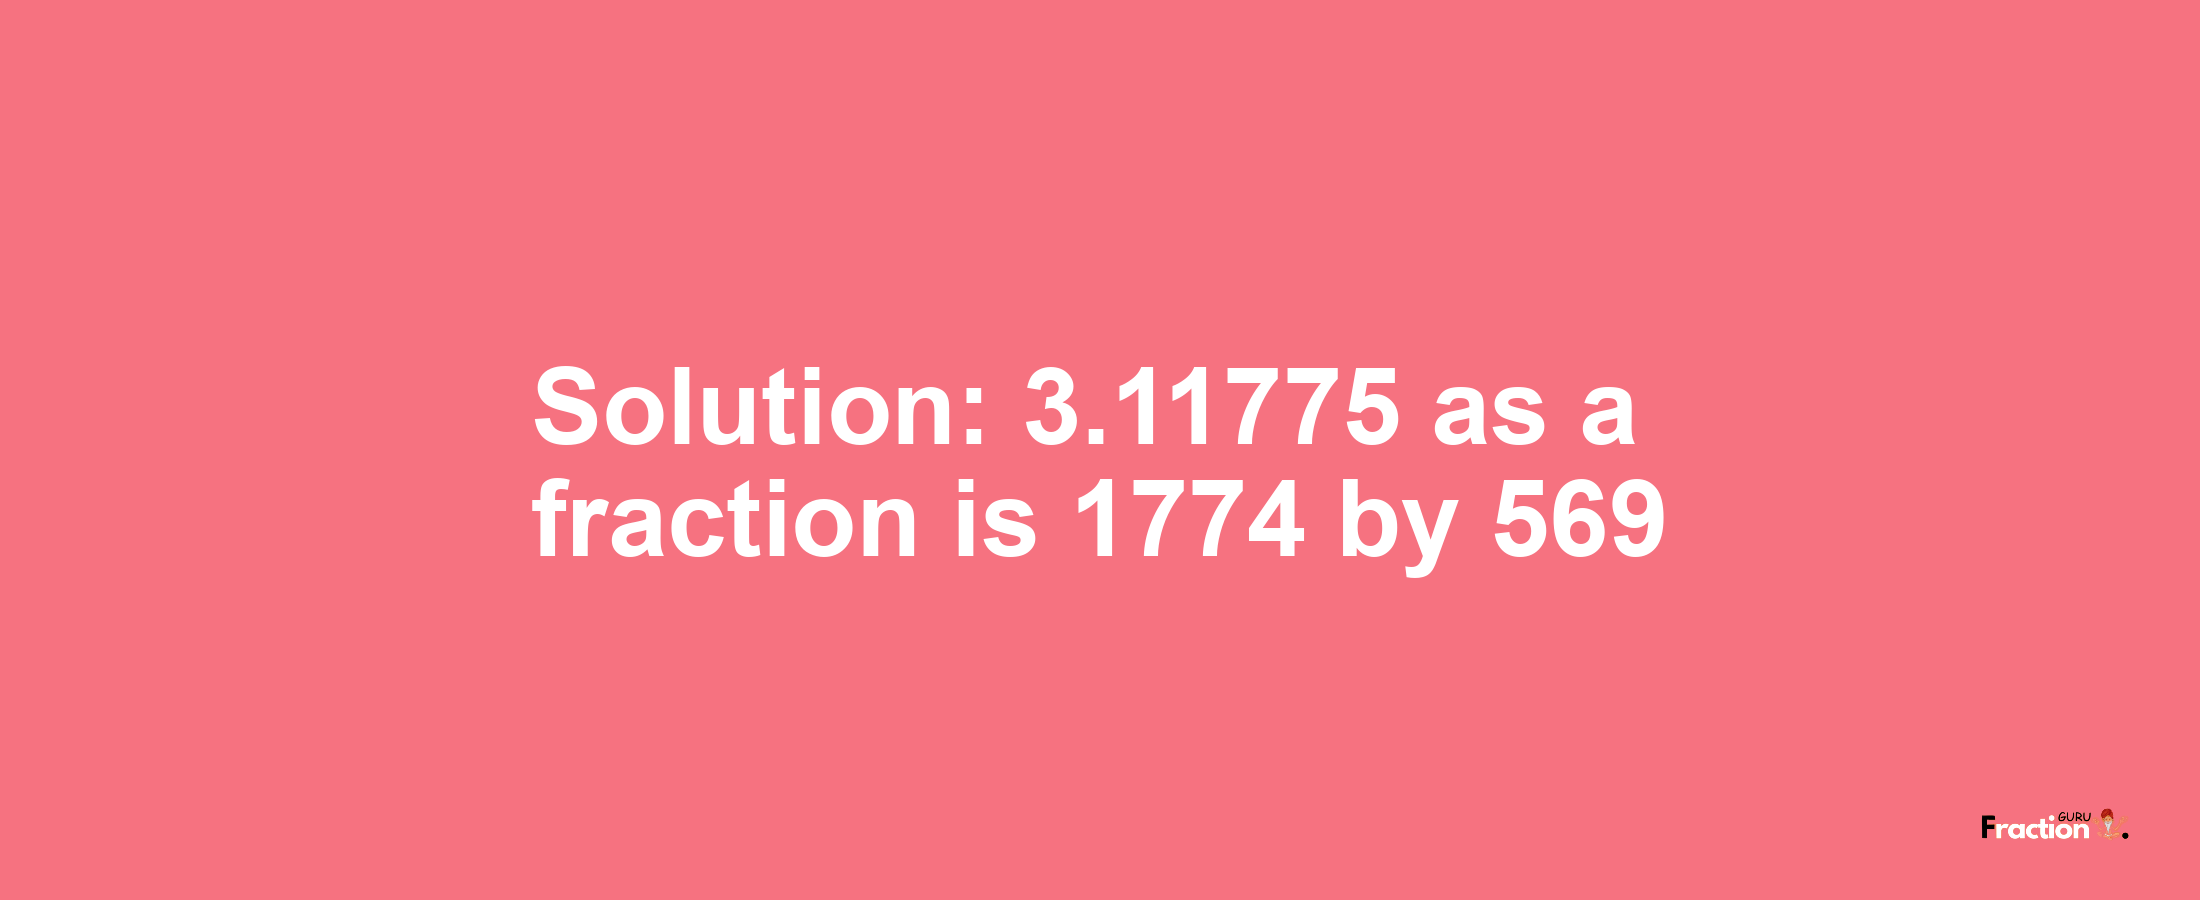 Solution:3.11775 as a fraction is 1774/569